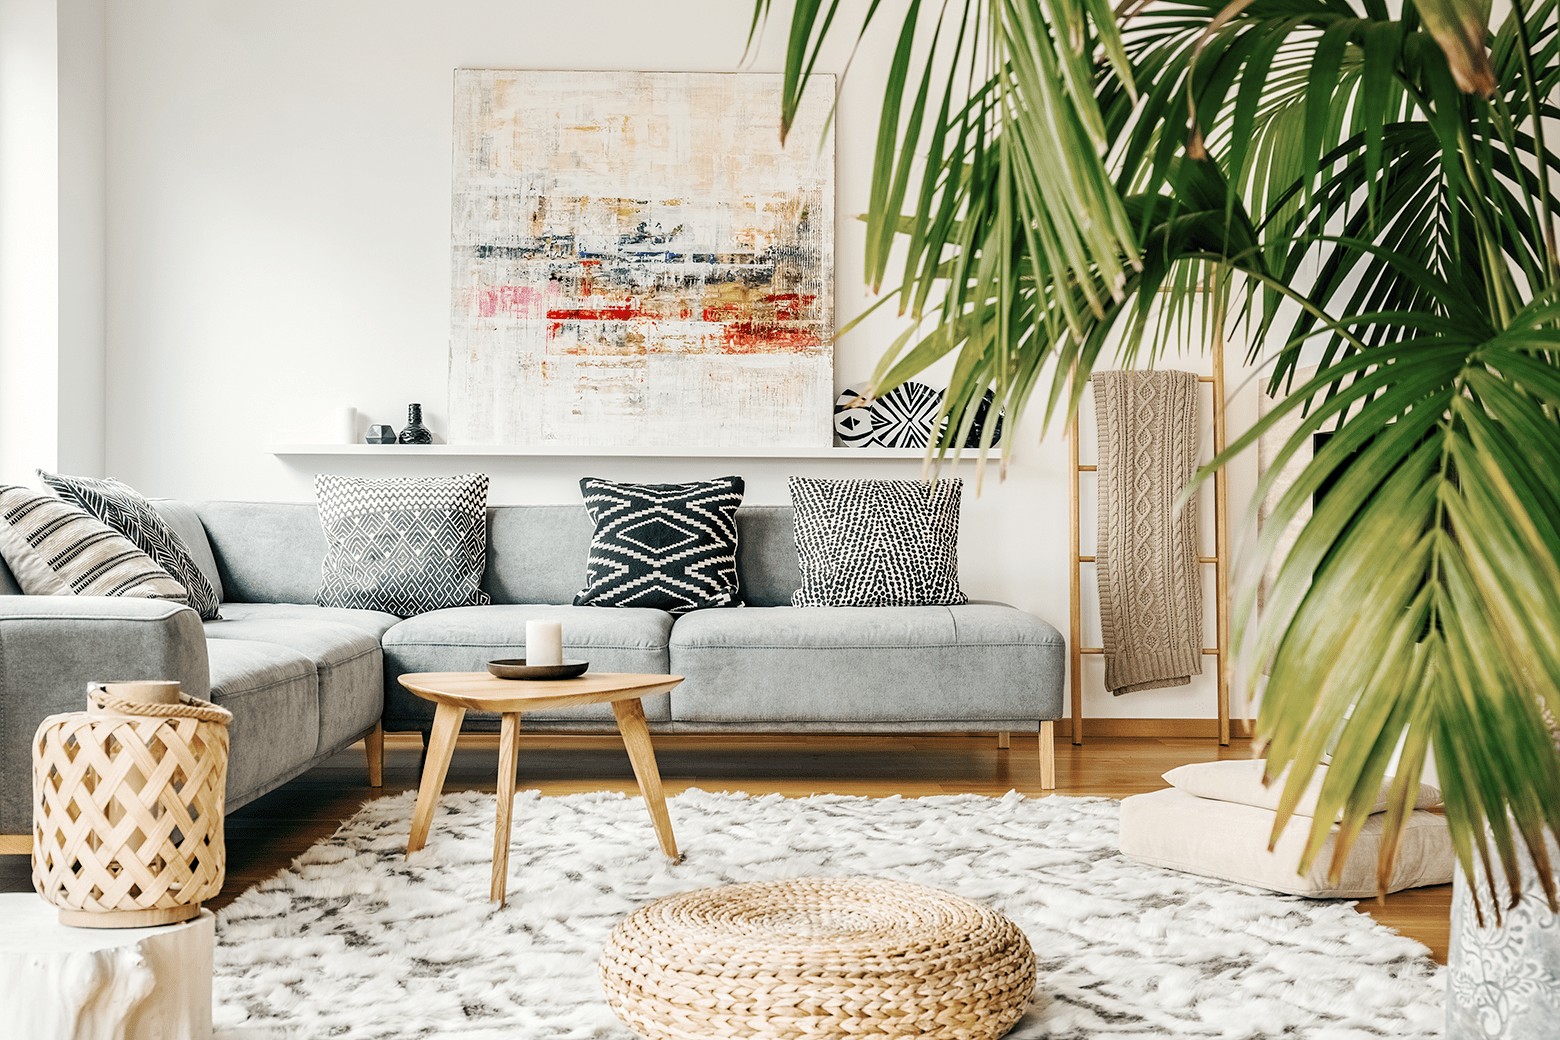 When a modern home decor obsession is a good thing 